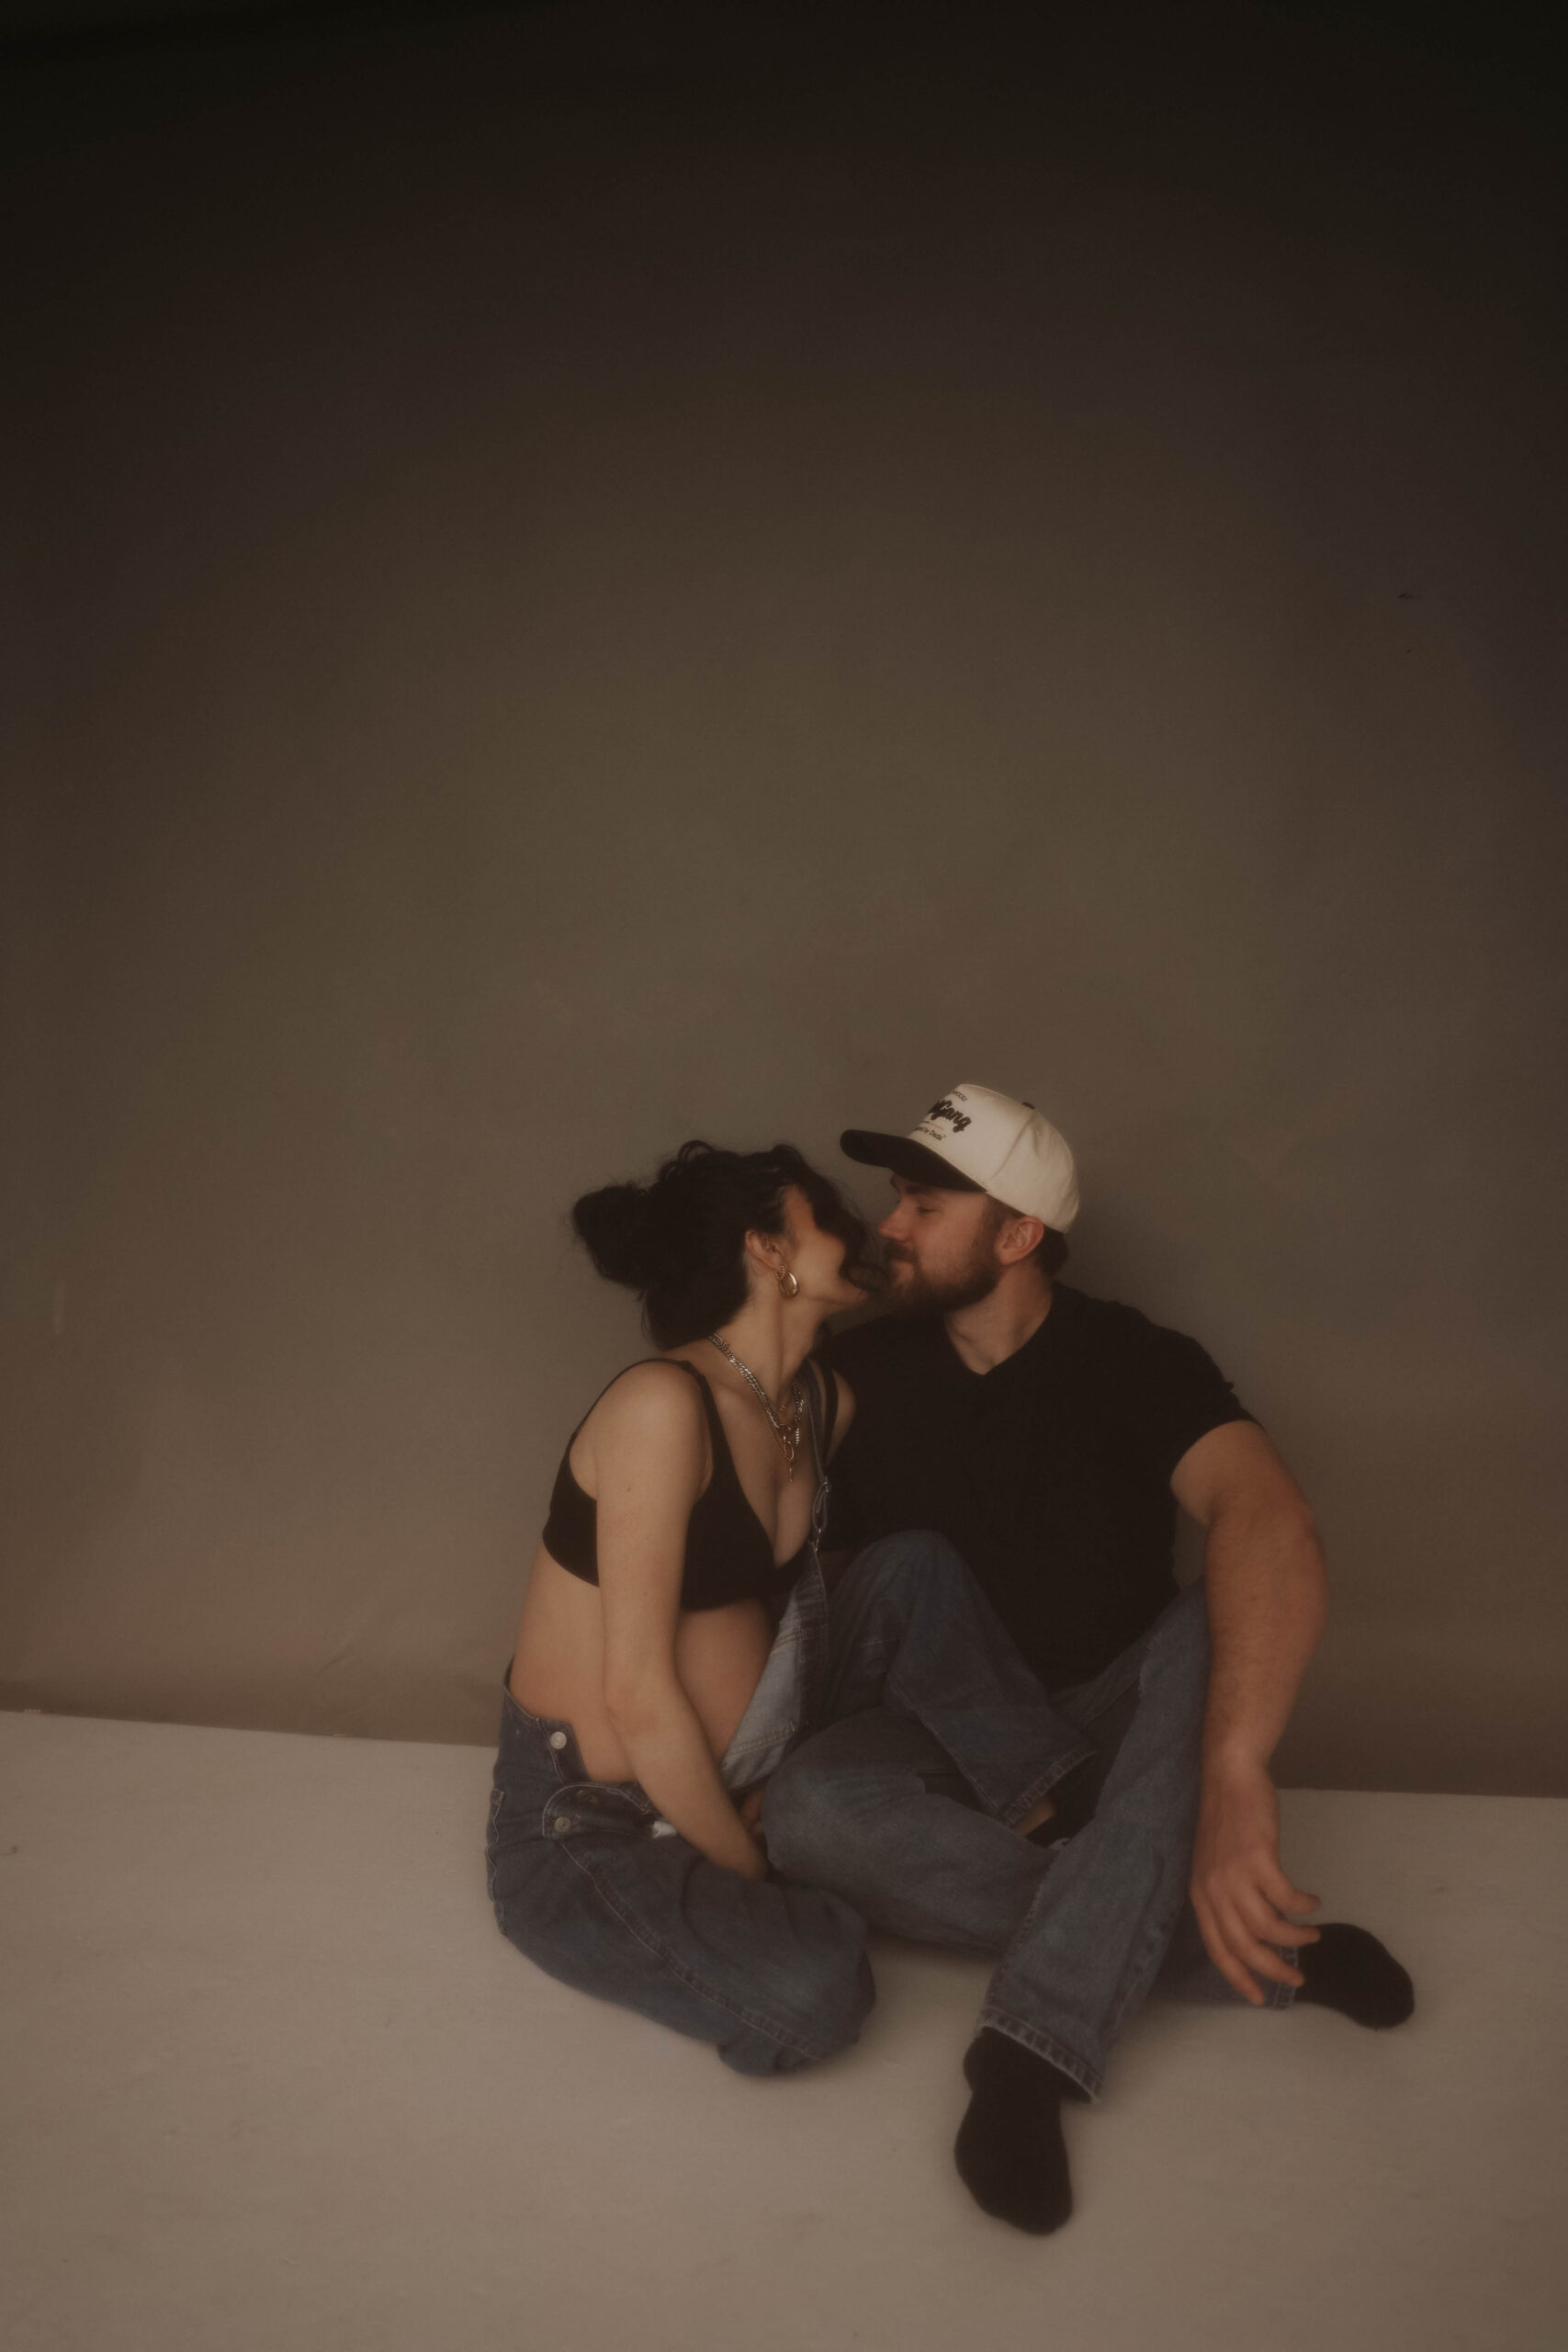 soon to be parents sitting on the floor smiling at each other during denver maternity photoshoot